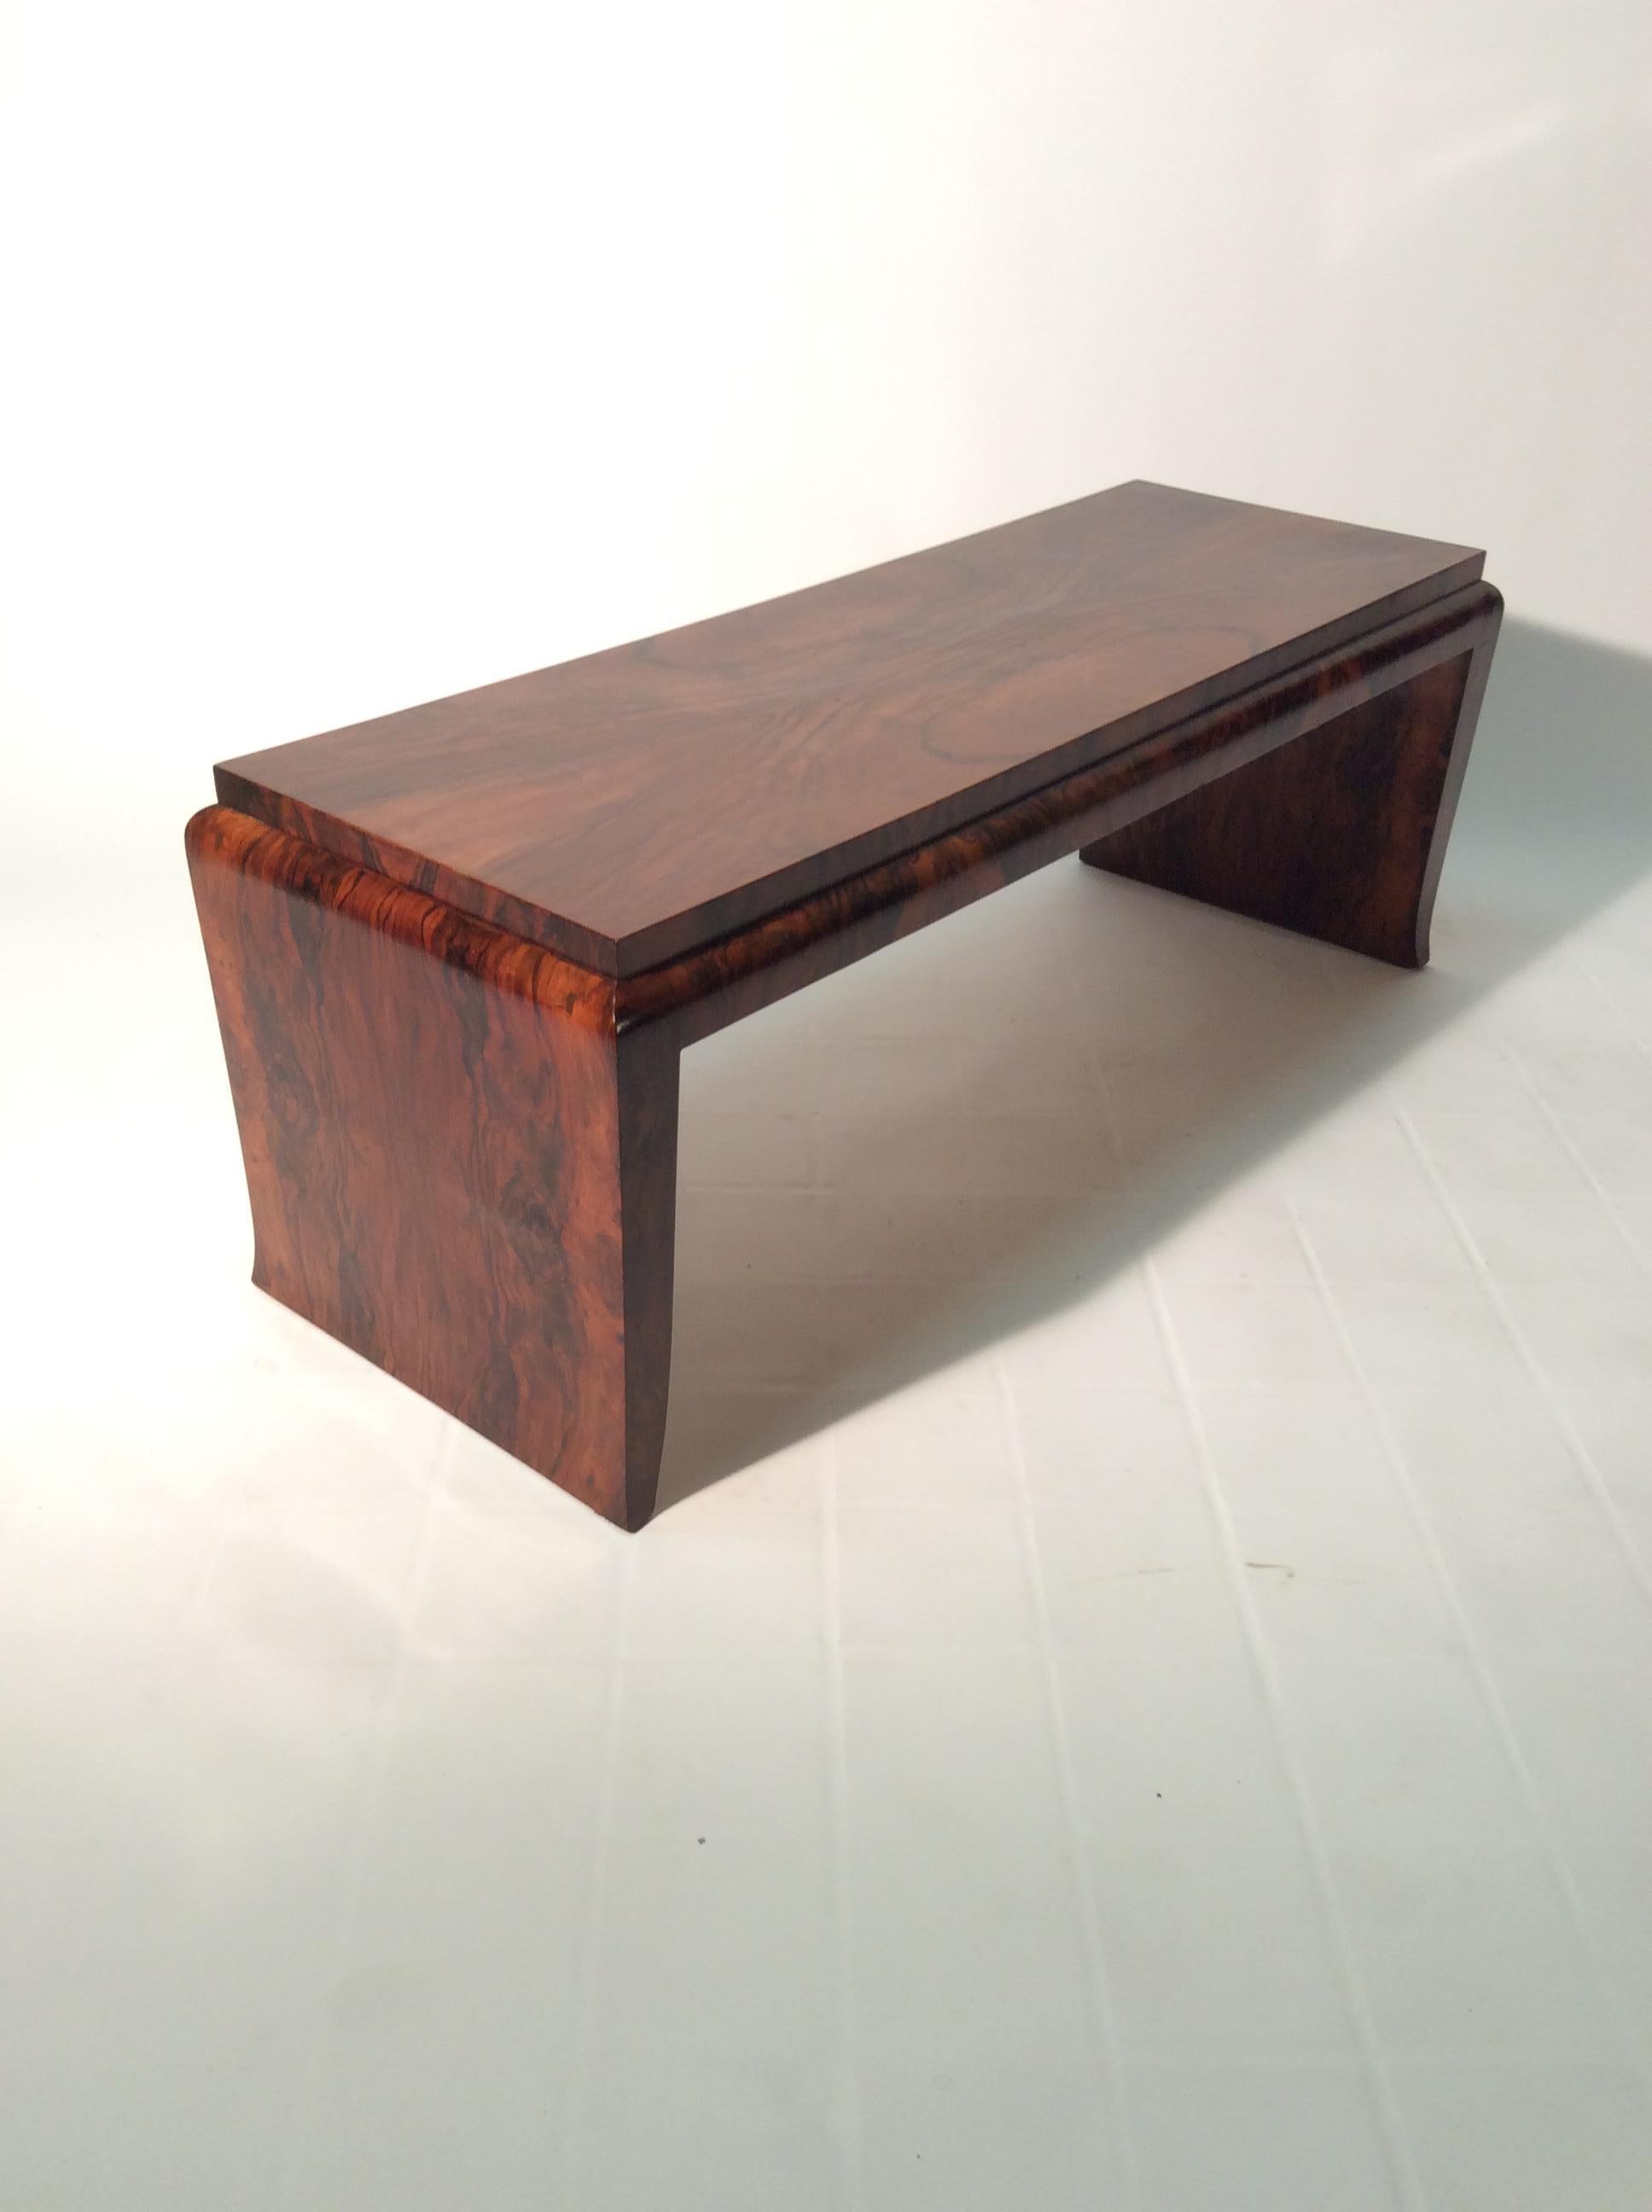 Coffee table Sofa table or rectangular bench thanks to the elongated shape it can be used in front of the sofa, made in Italy in the 1930s Art Deco period with beautiful warm color walnut briar, this table is characterized by its stilysh proportion